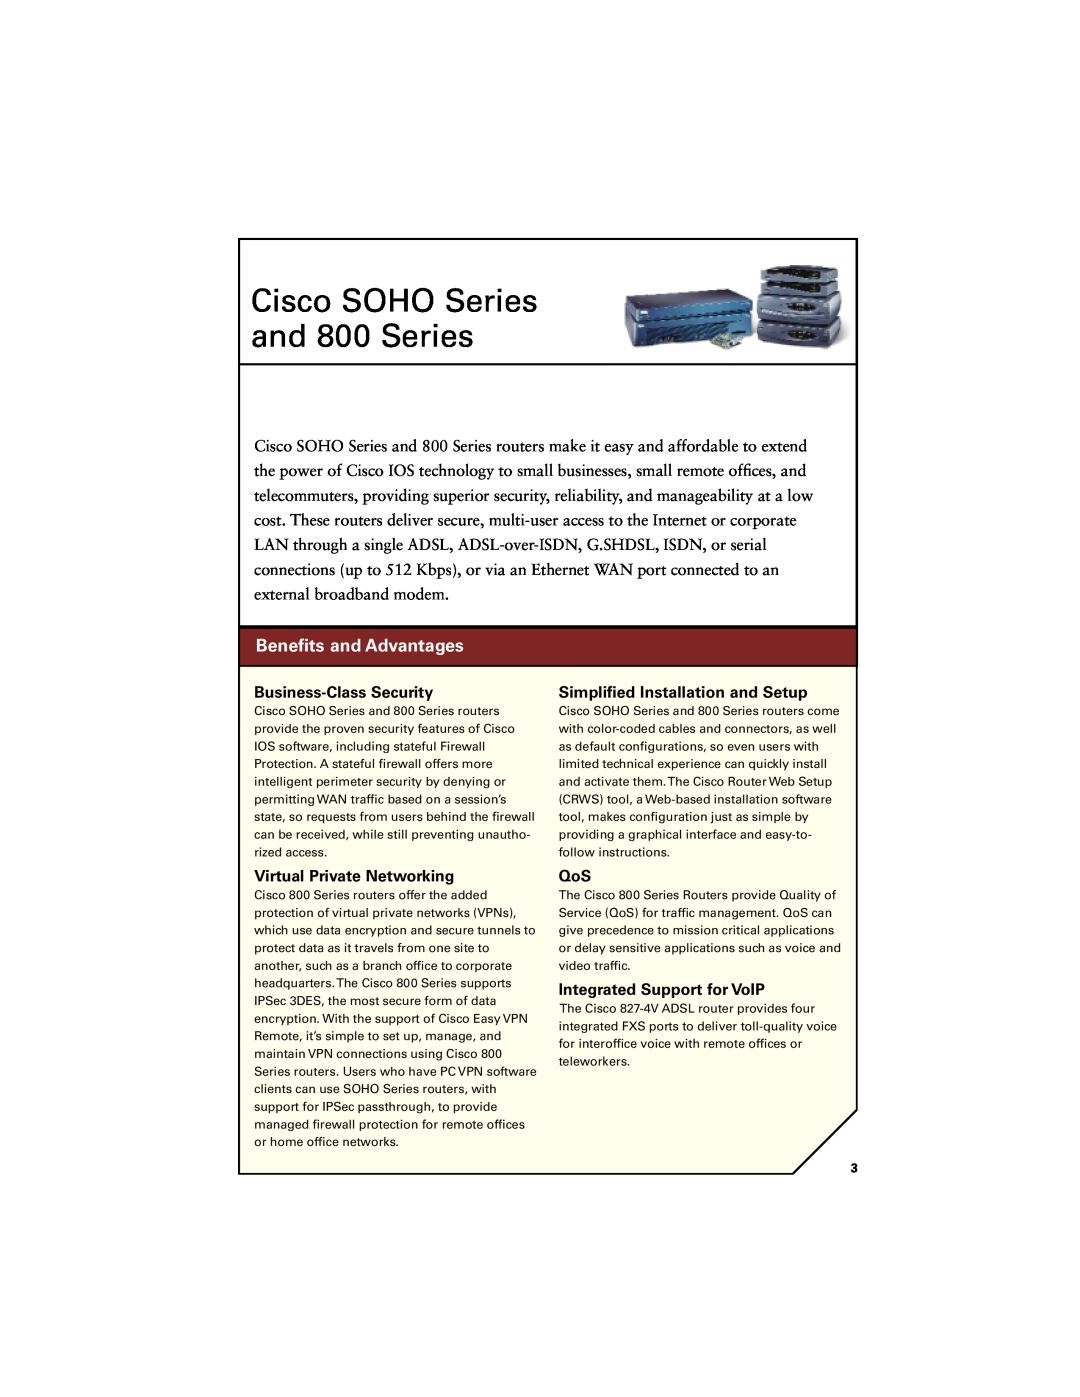 Cisco Systems 7400, 7300, 7200 manual Cisco SOHO Series and 800 Series, Beneﬁts and Advantages, Business-Class Security 